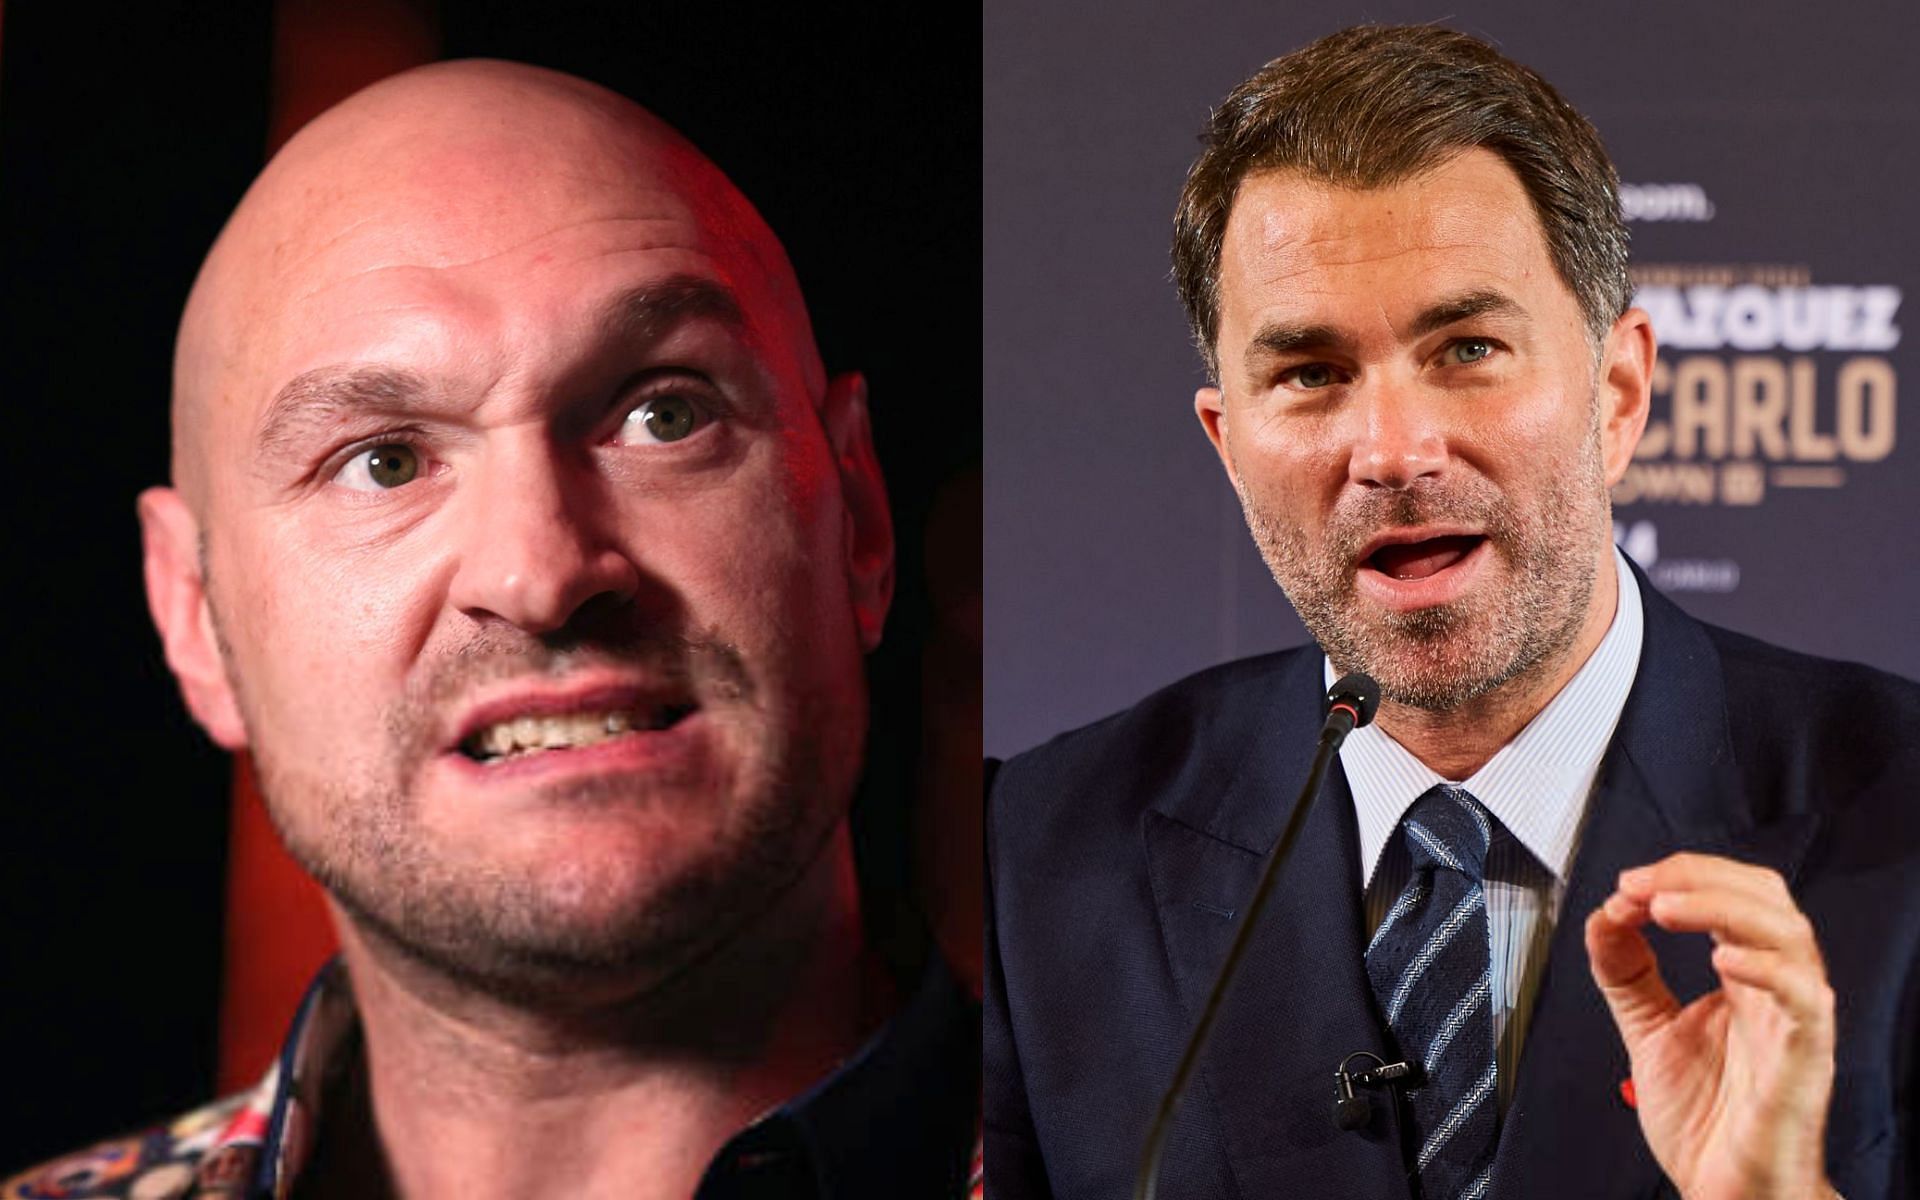 Tyson Fury (left) and Eddie Hearn (right) [Images Courtesy: @GettyImages]